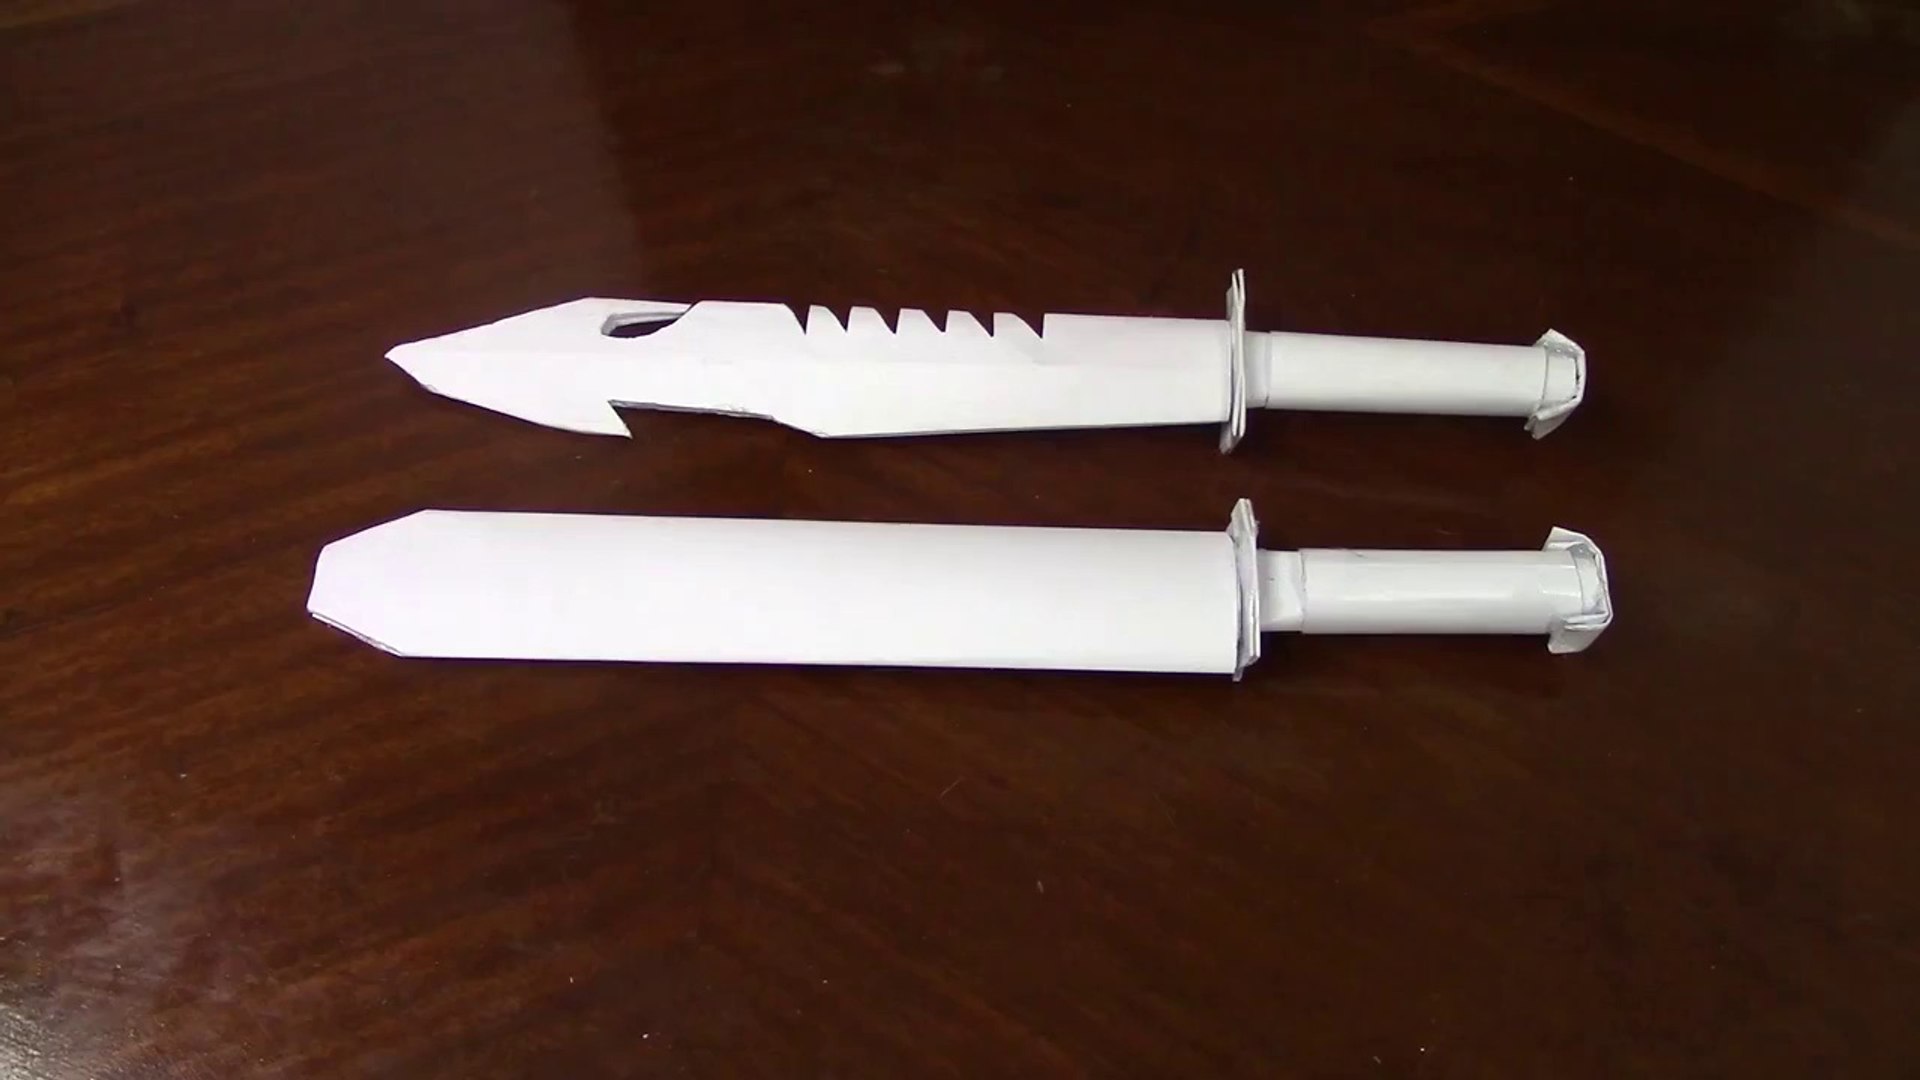 How to make a paper combat knife that cuts - paper weapons - video ...